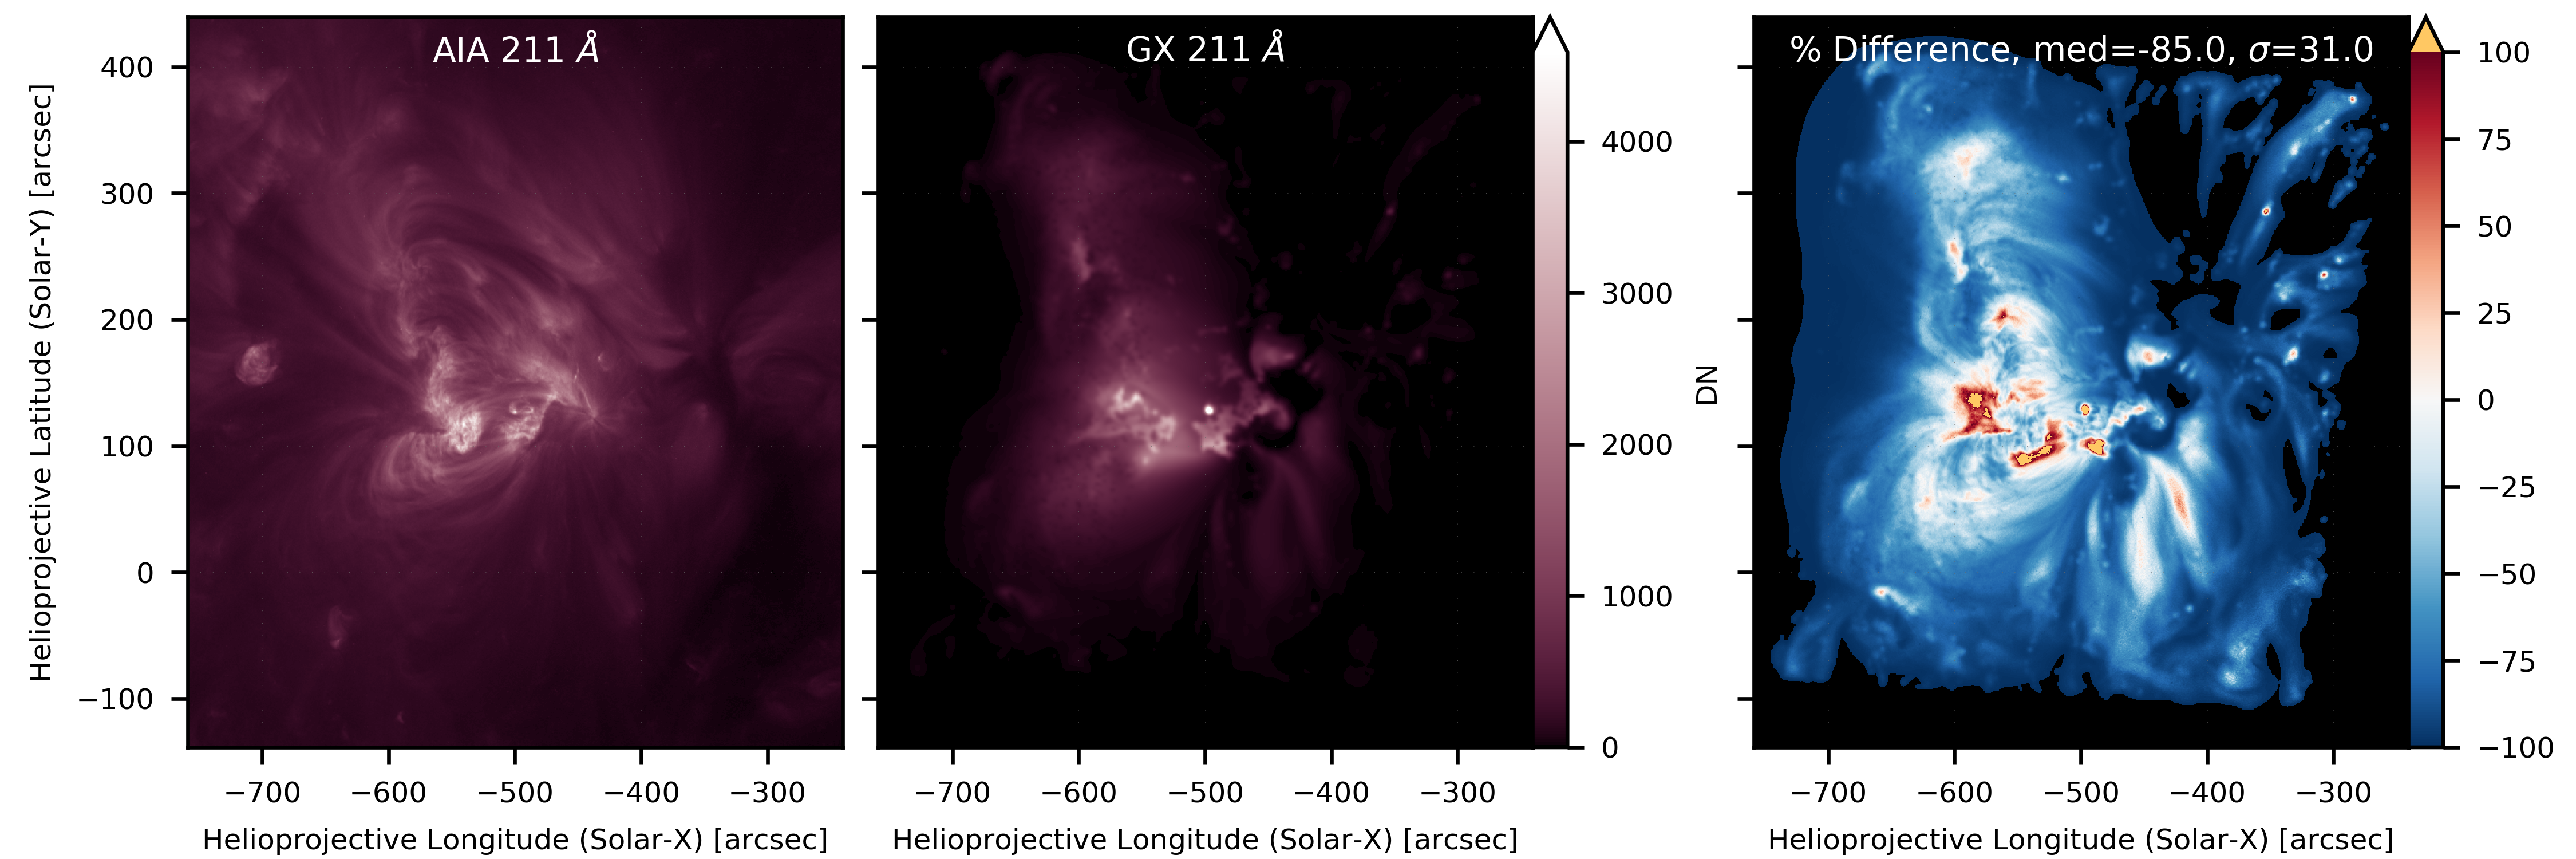 Comparison between AIA image and modeled active region image generated by GX Simulator